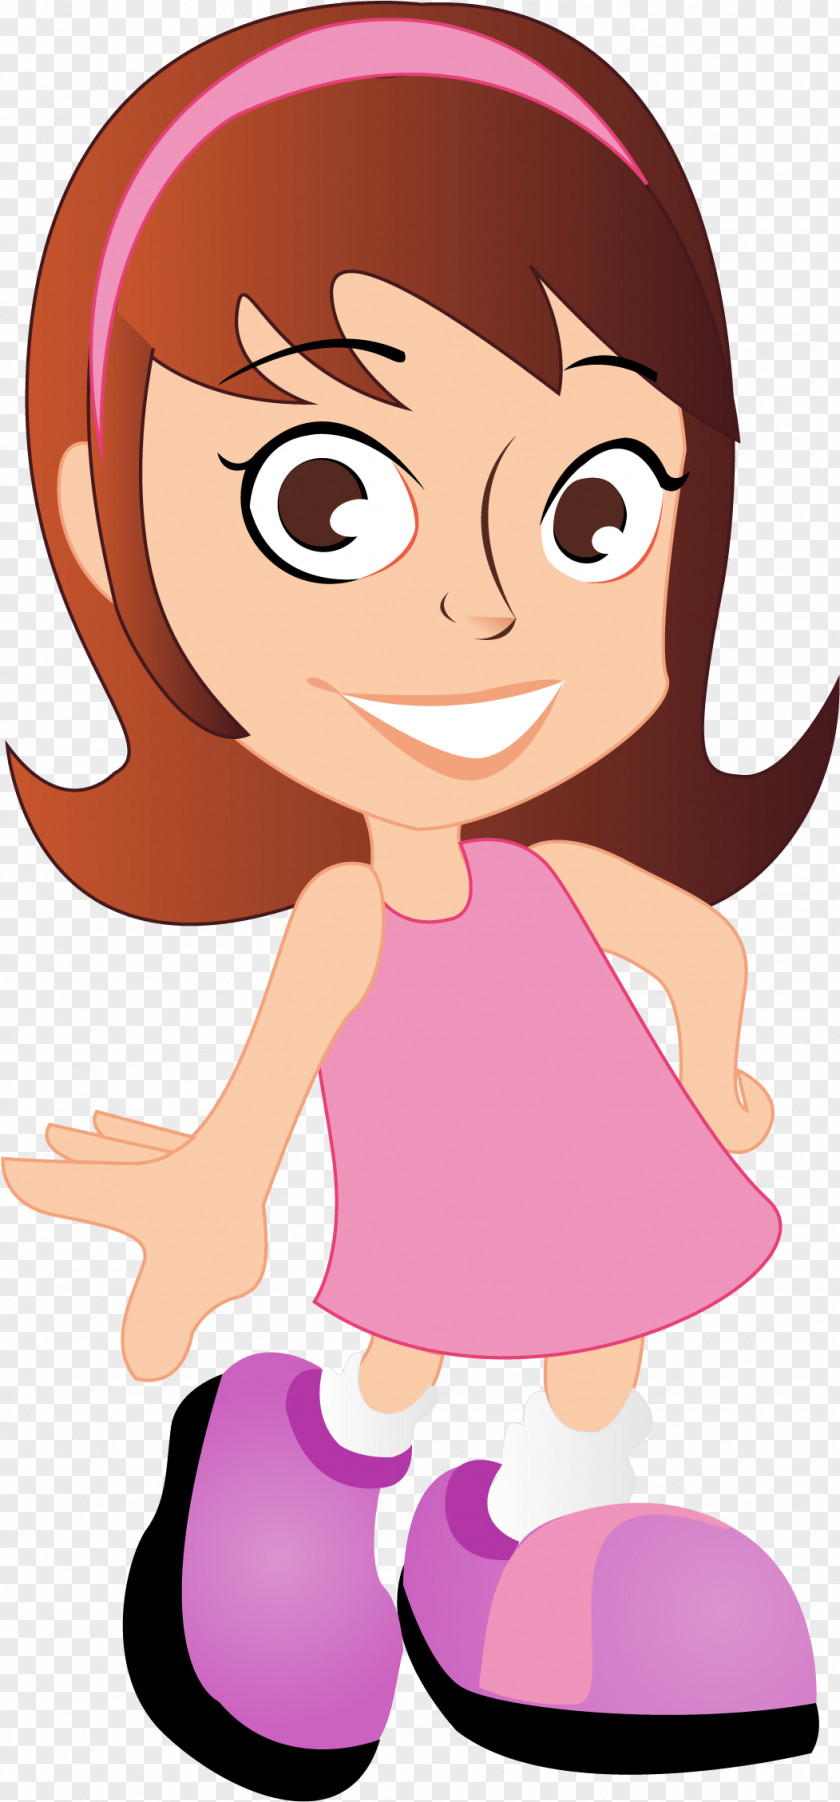 Cartoon Animation Finger Smile Style PNG